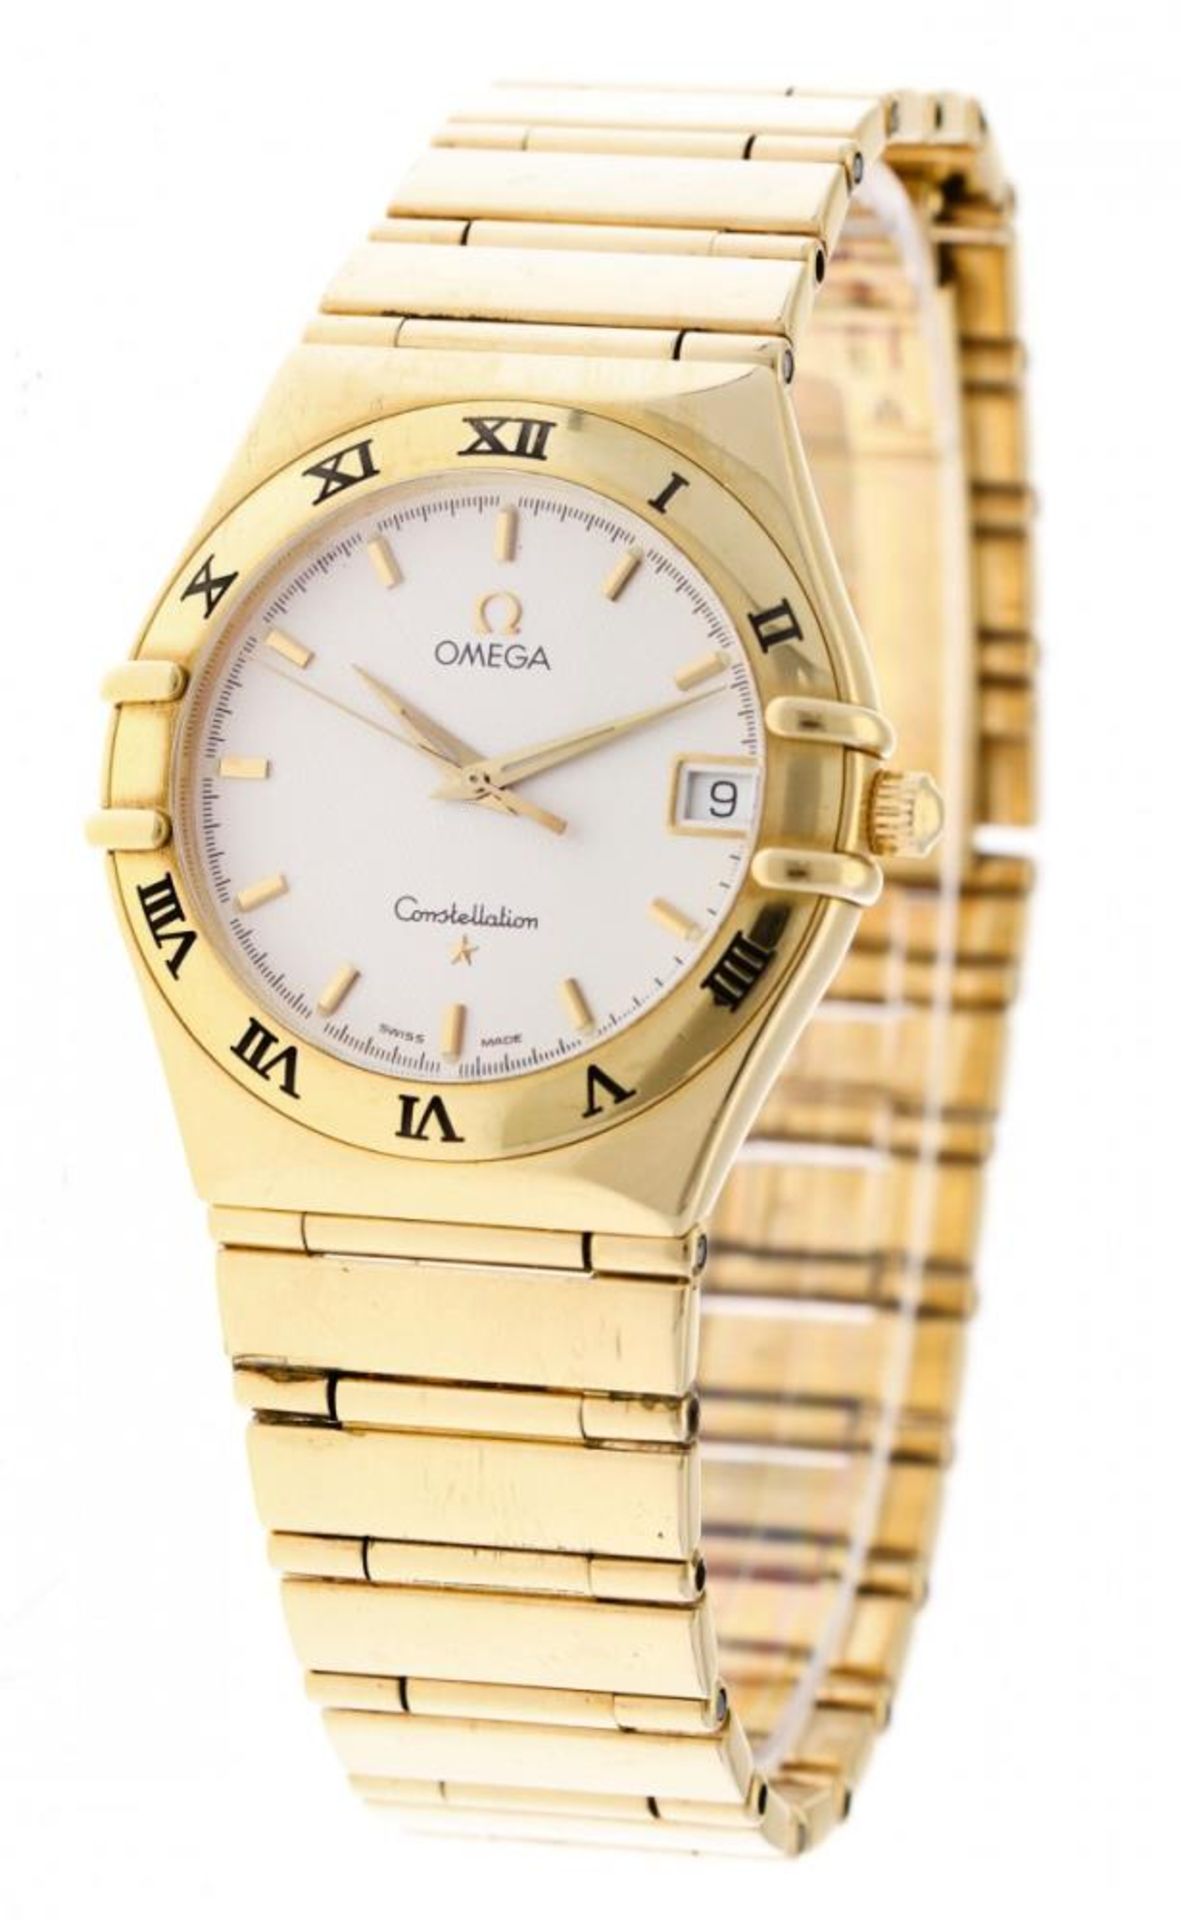 Omega Constellation 3961201 -Men's watch - approx. 1998 - Image 2 of 5